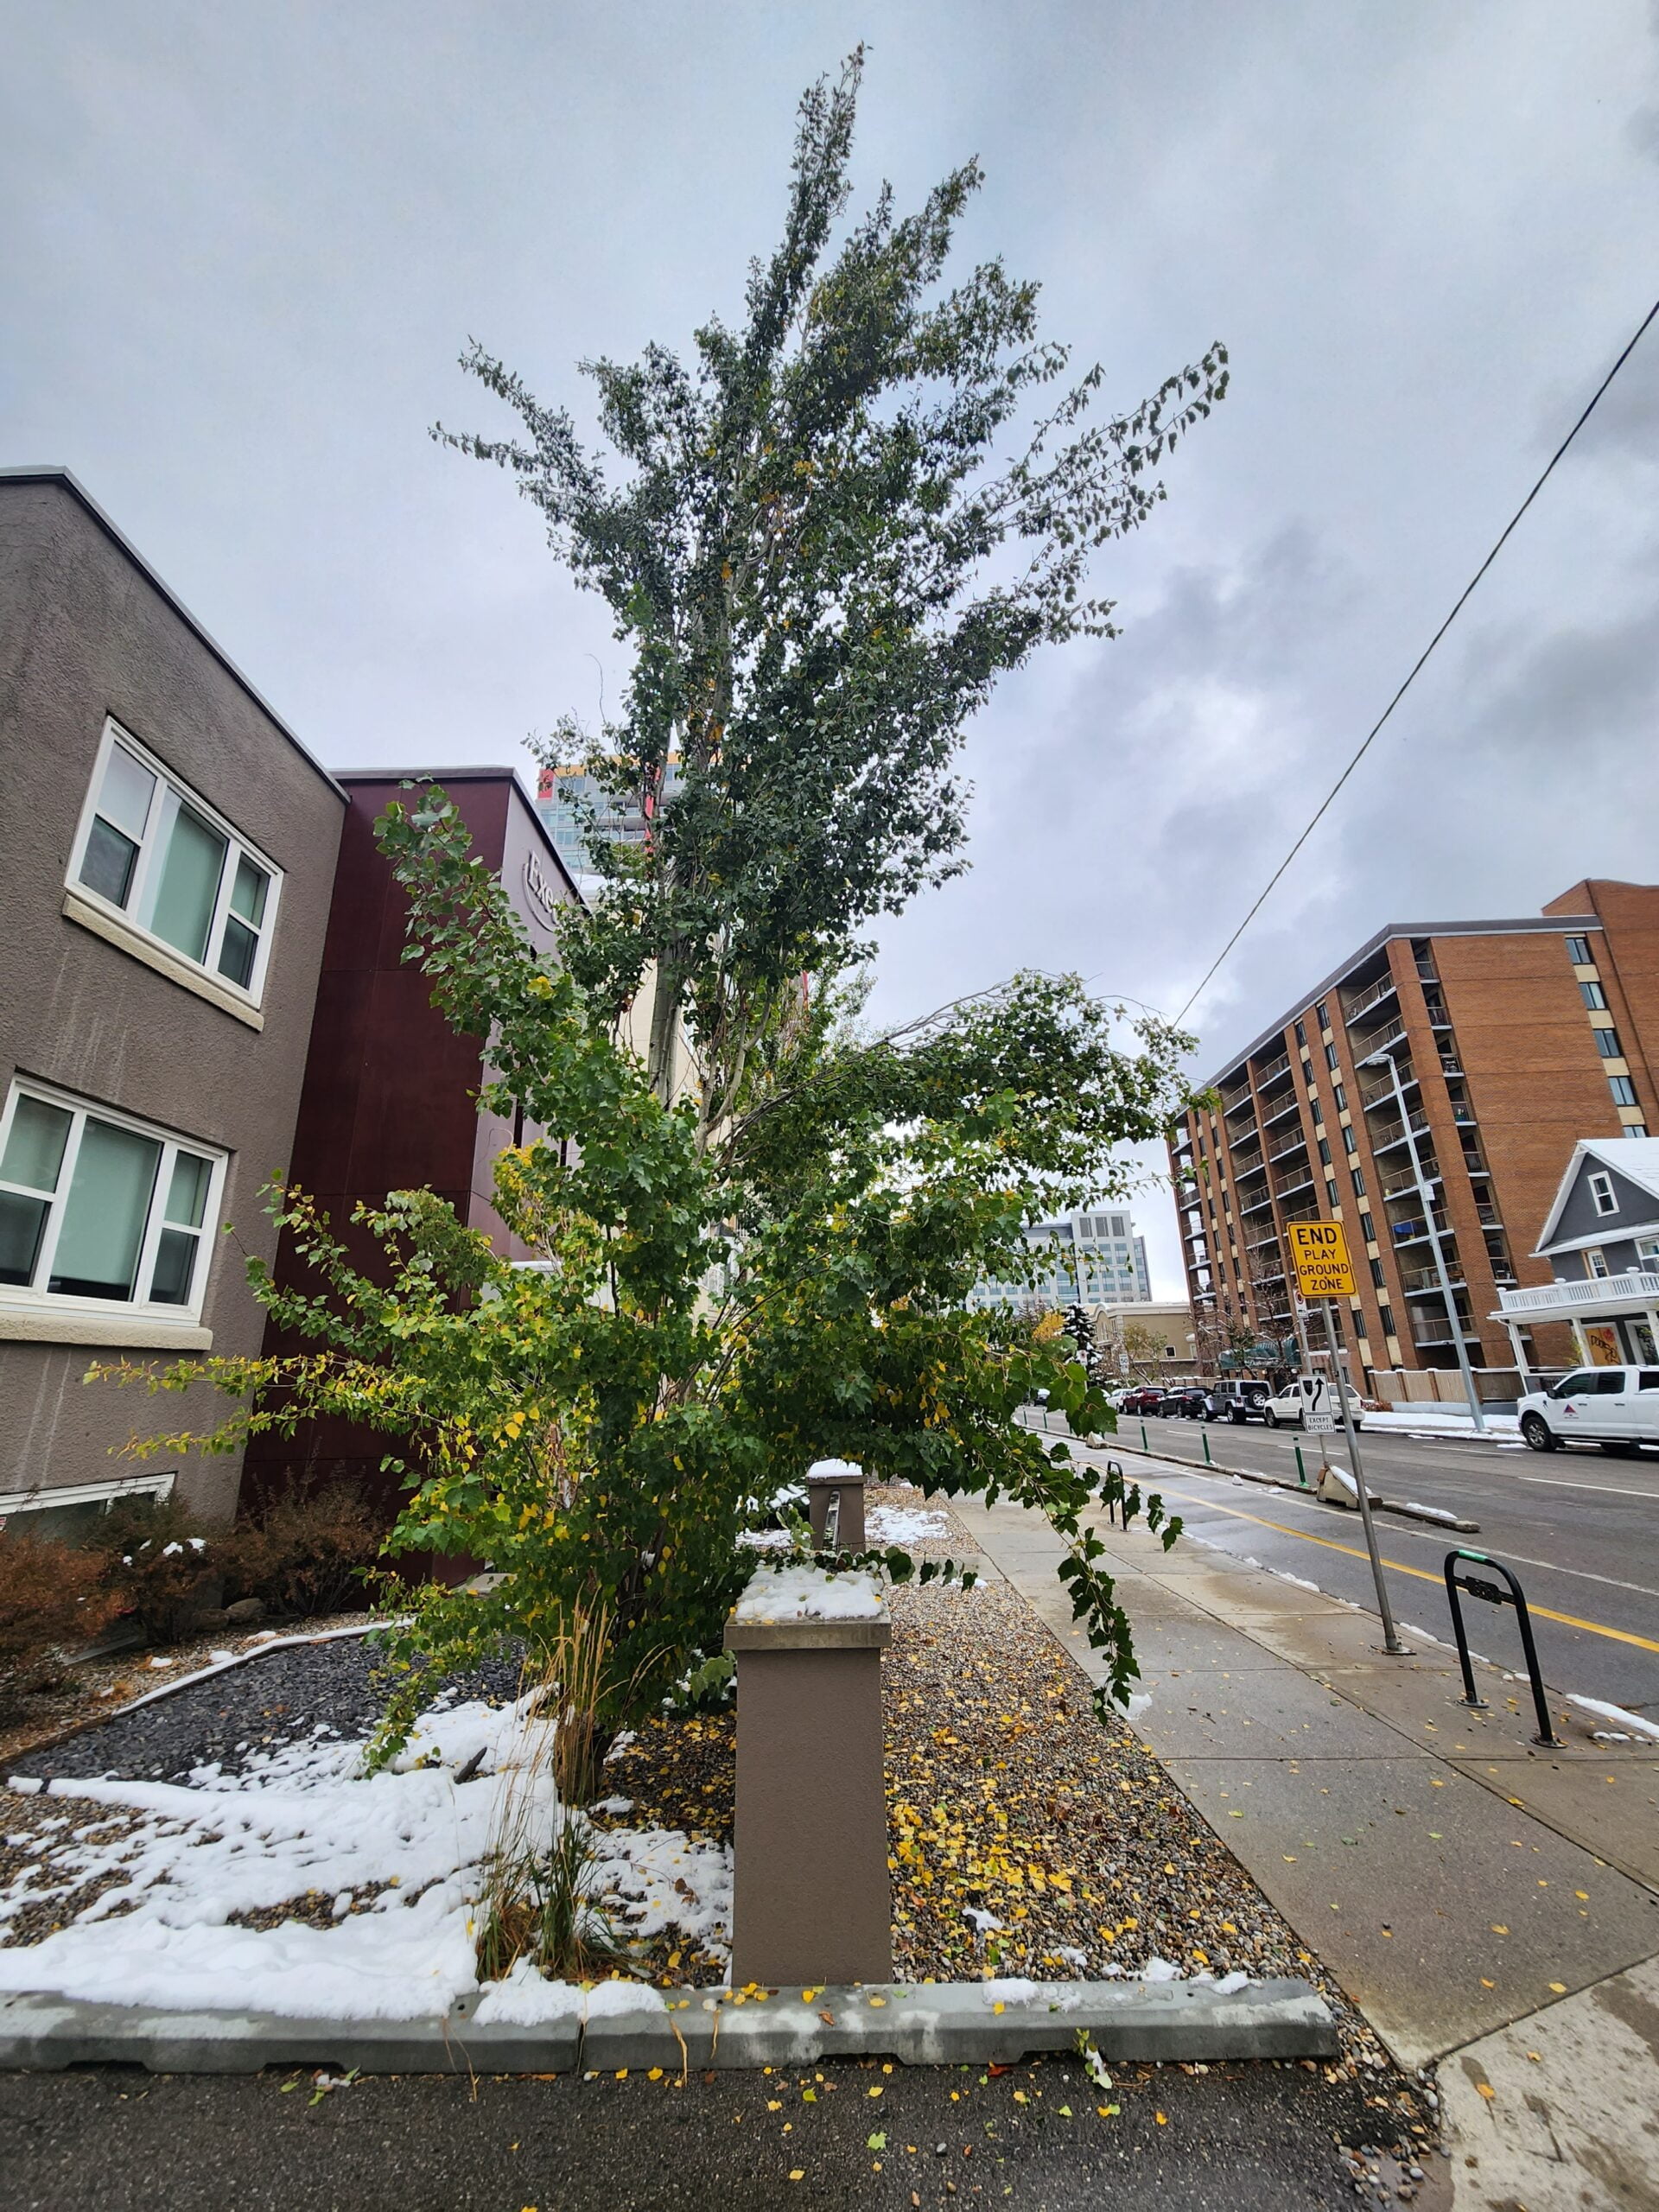 Towering Poplar with droopy branches, Calgary